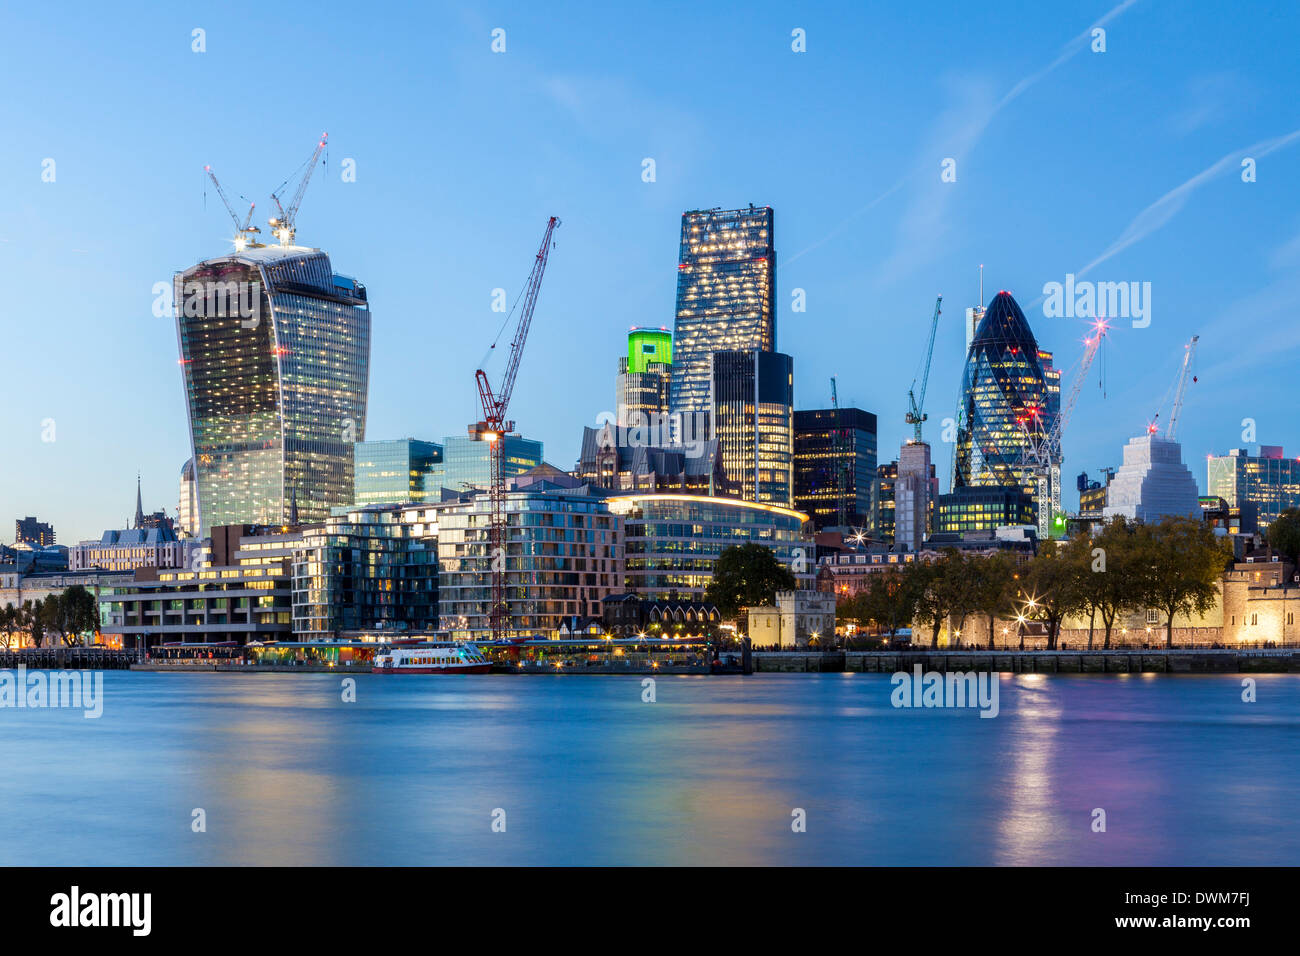 The City of London skyline with the Gherkin on the right, London, England, United Kingdom, Europe Stock Photo